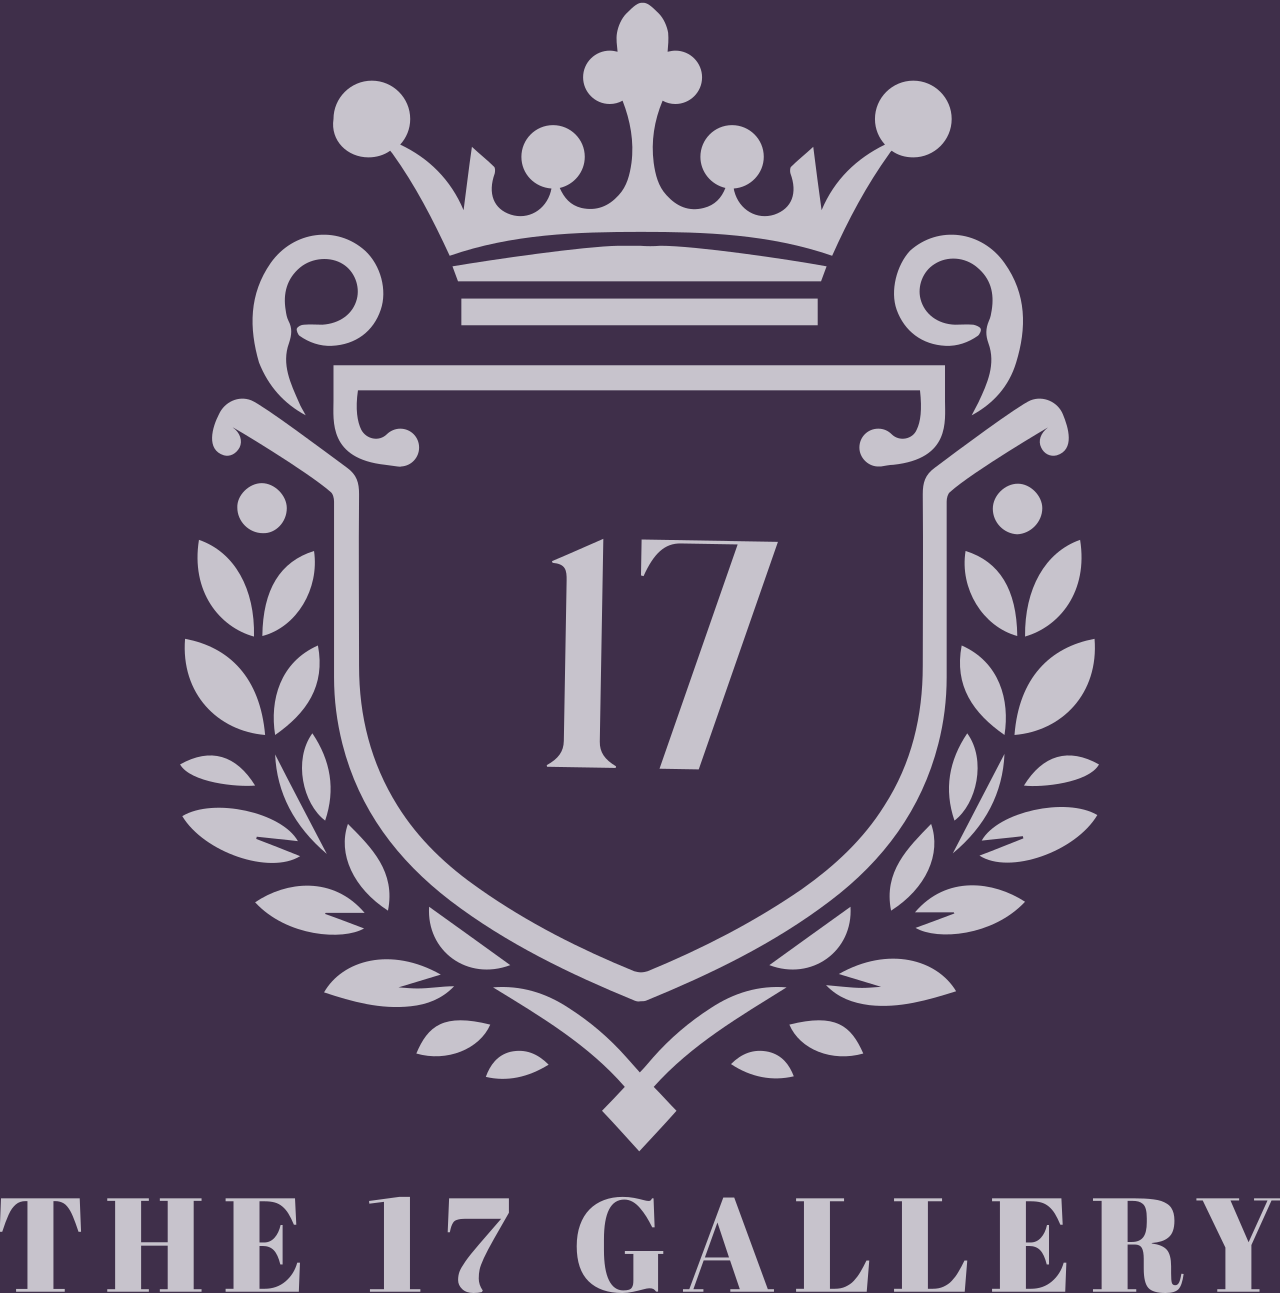 The 17 Gallery's logo